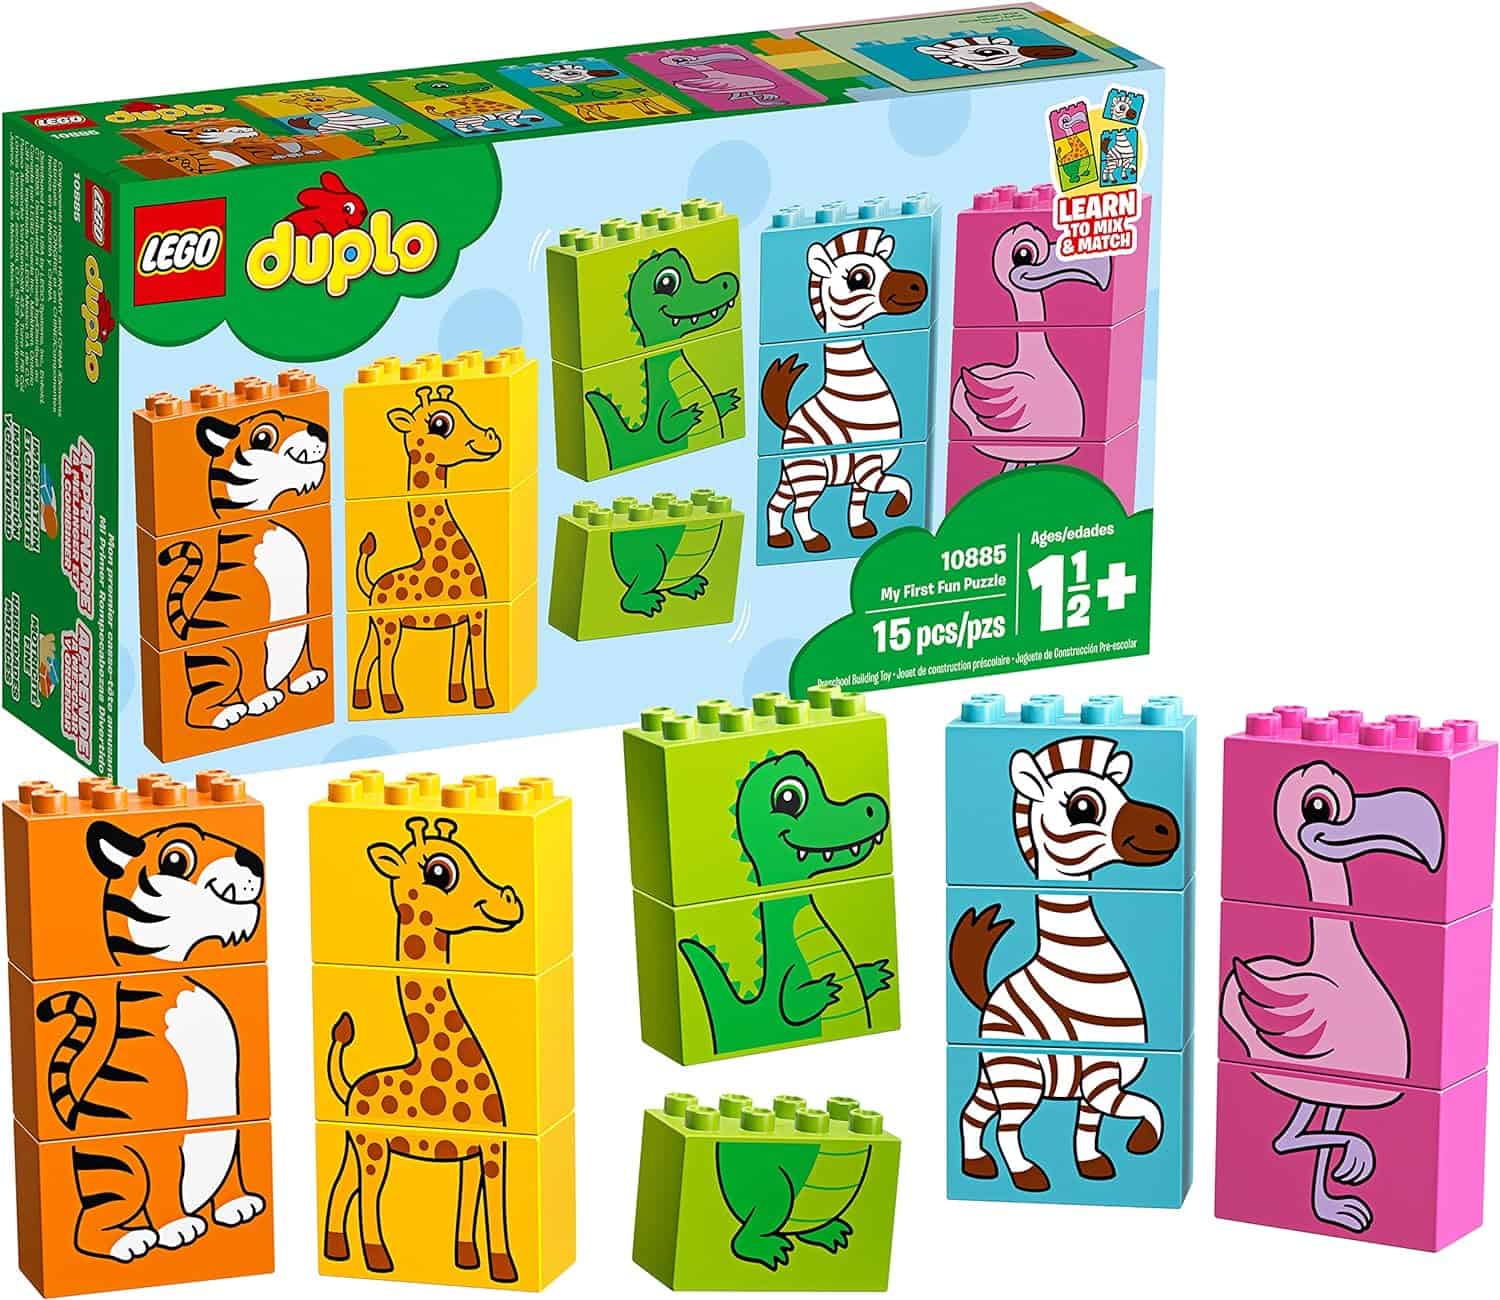 The classic first fun puzzle LEGO Duplo set- Ages 18 months and above